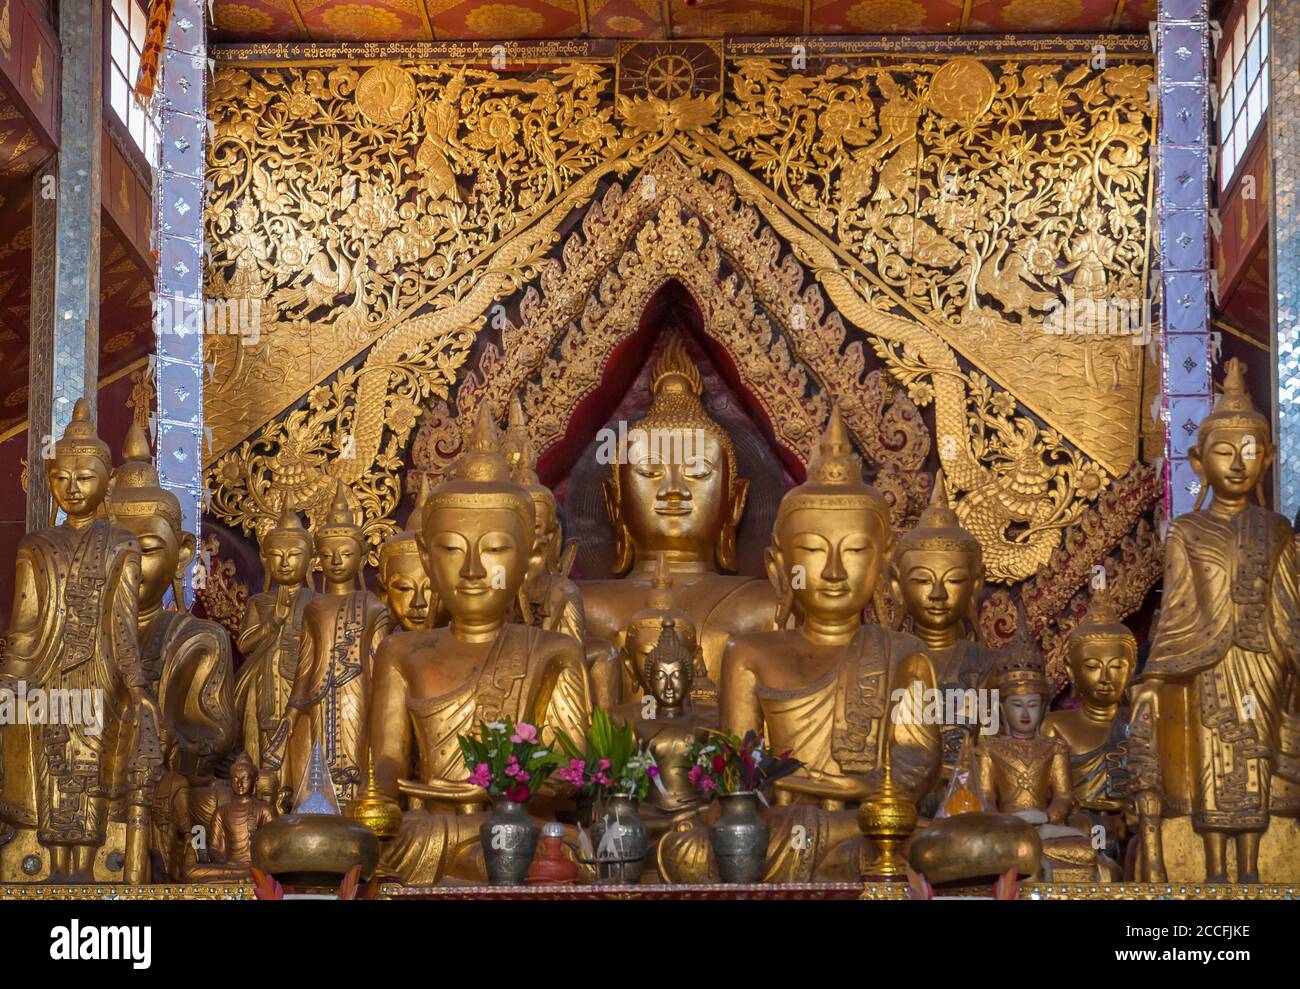 Buddhistische Pagode und Tempel, Kengtung, Shan Staat, Myanmar Stockfoto